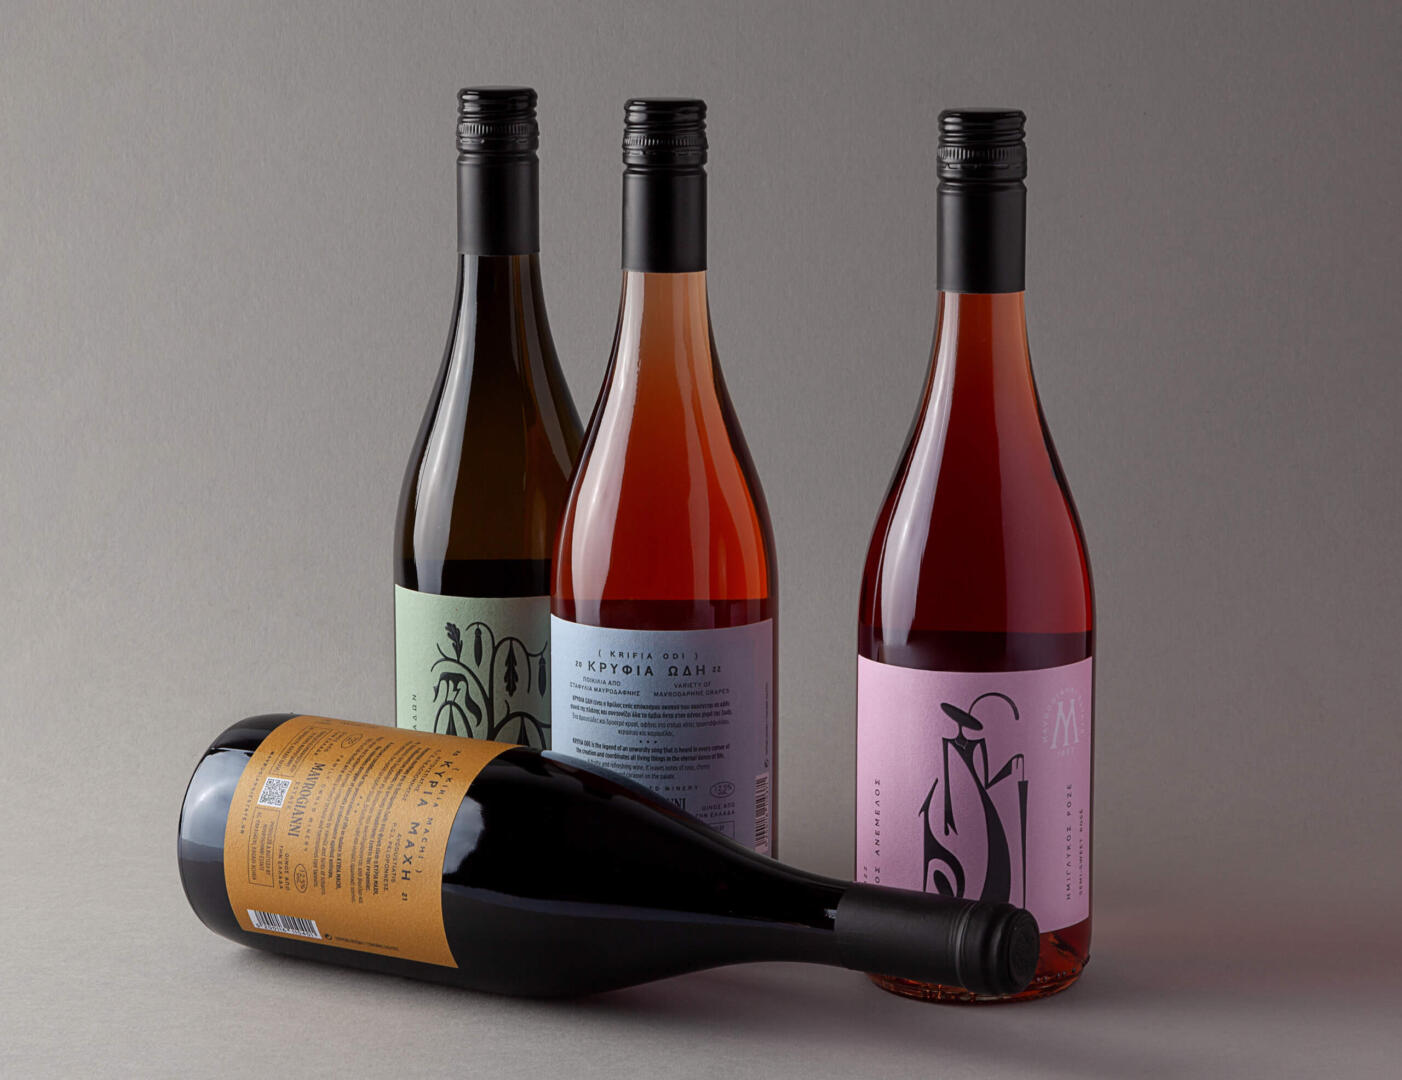 Mavrogianni Estate Identity and Packaging Design for core wines ...